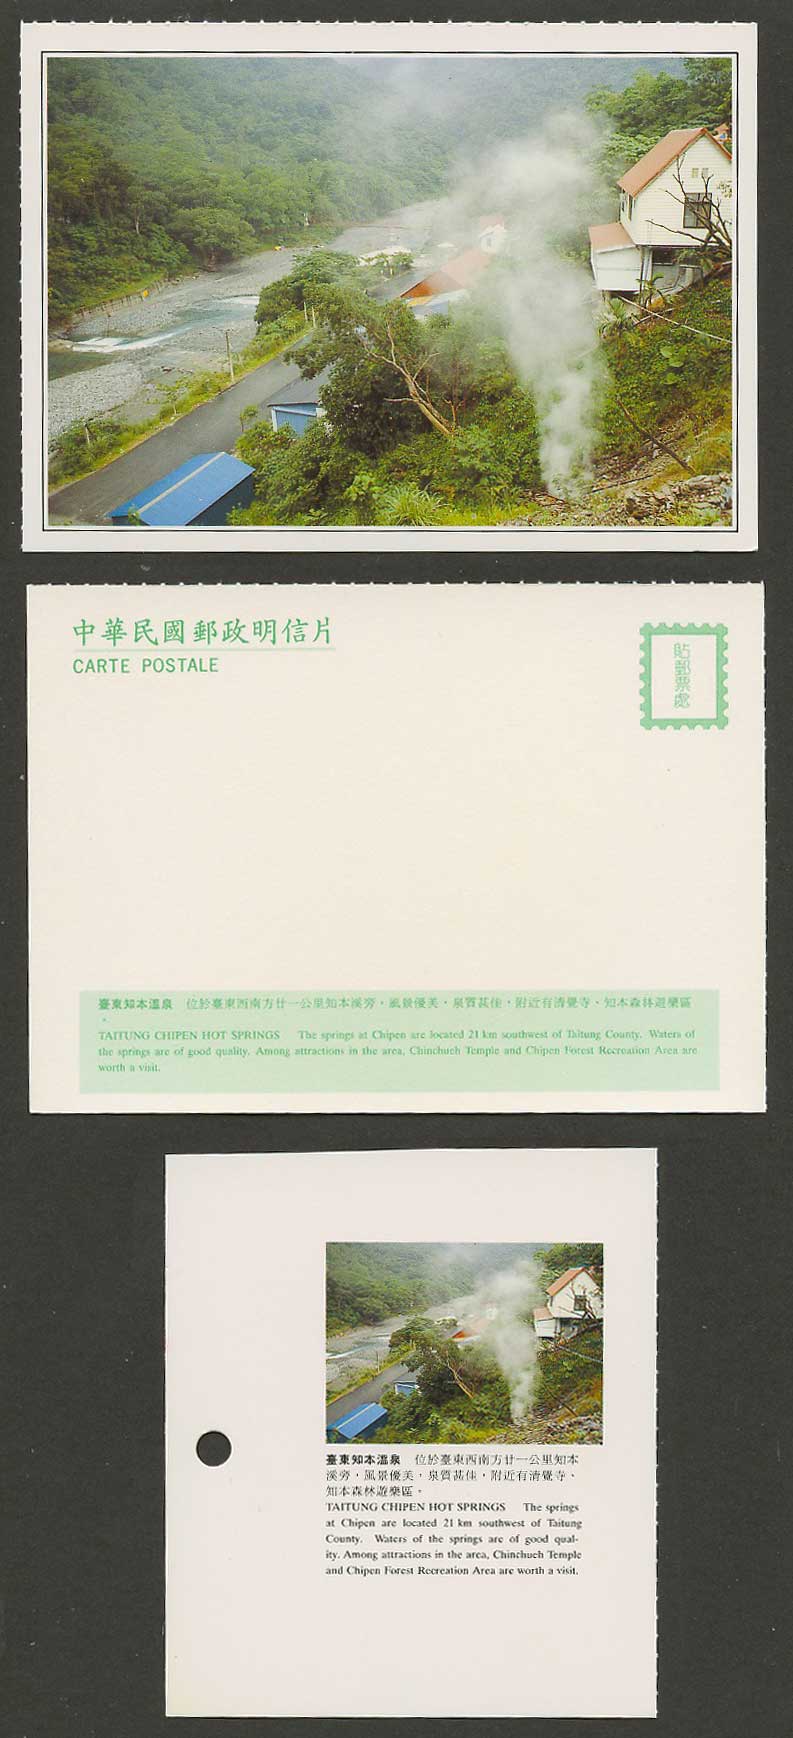 Taiwan Formosa China Postcard Taitung Chipen Hot Springs River Forest 臺東知本溫泉 知本溪